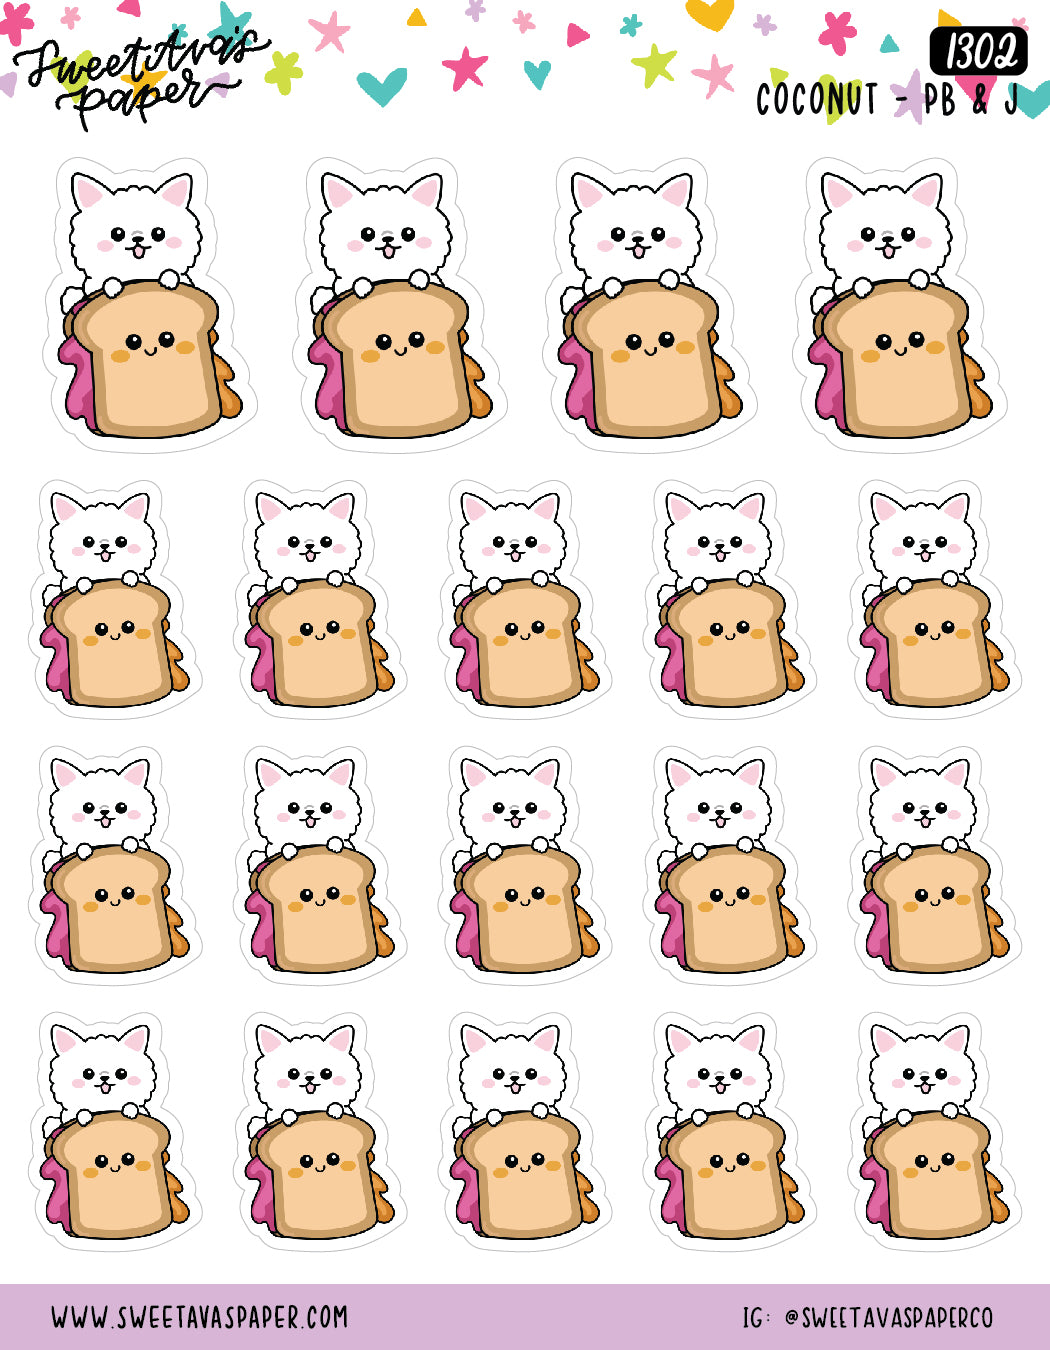 Peanut Butter And Jelly Sandwich Planner Stickers - Coconut [1302]